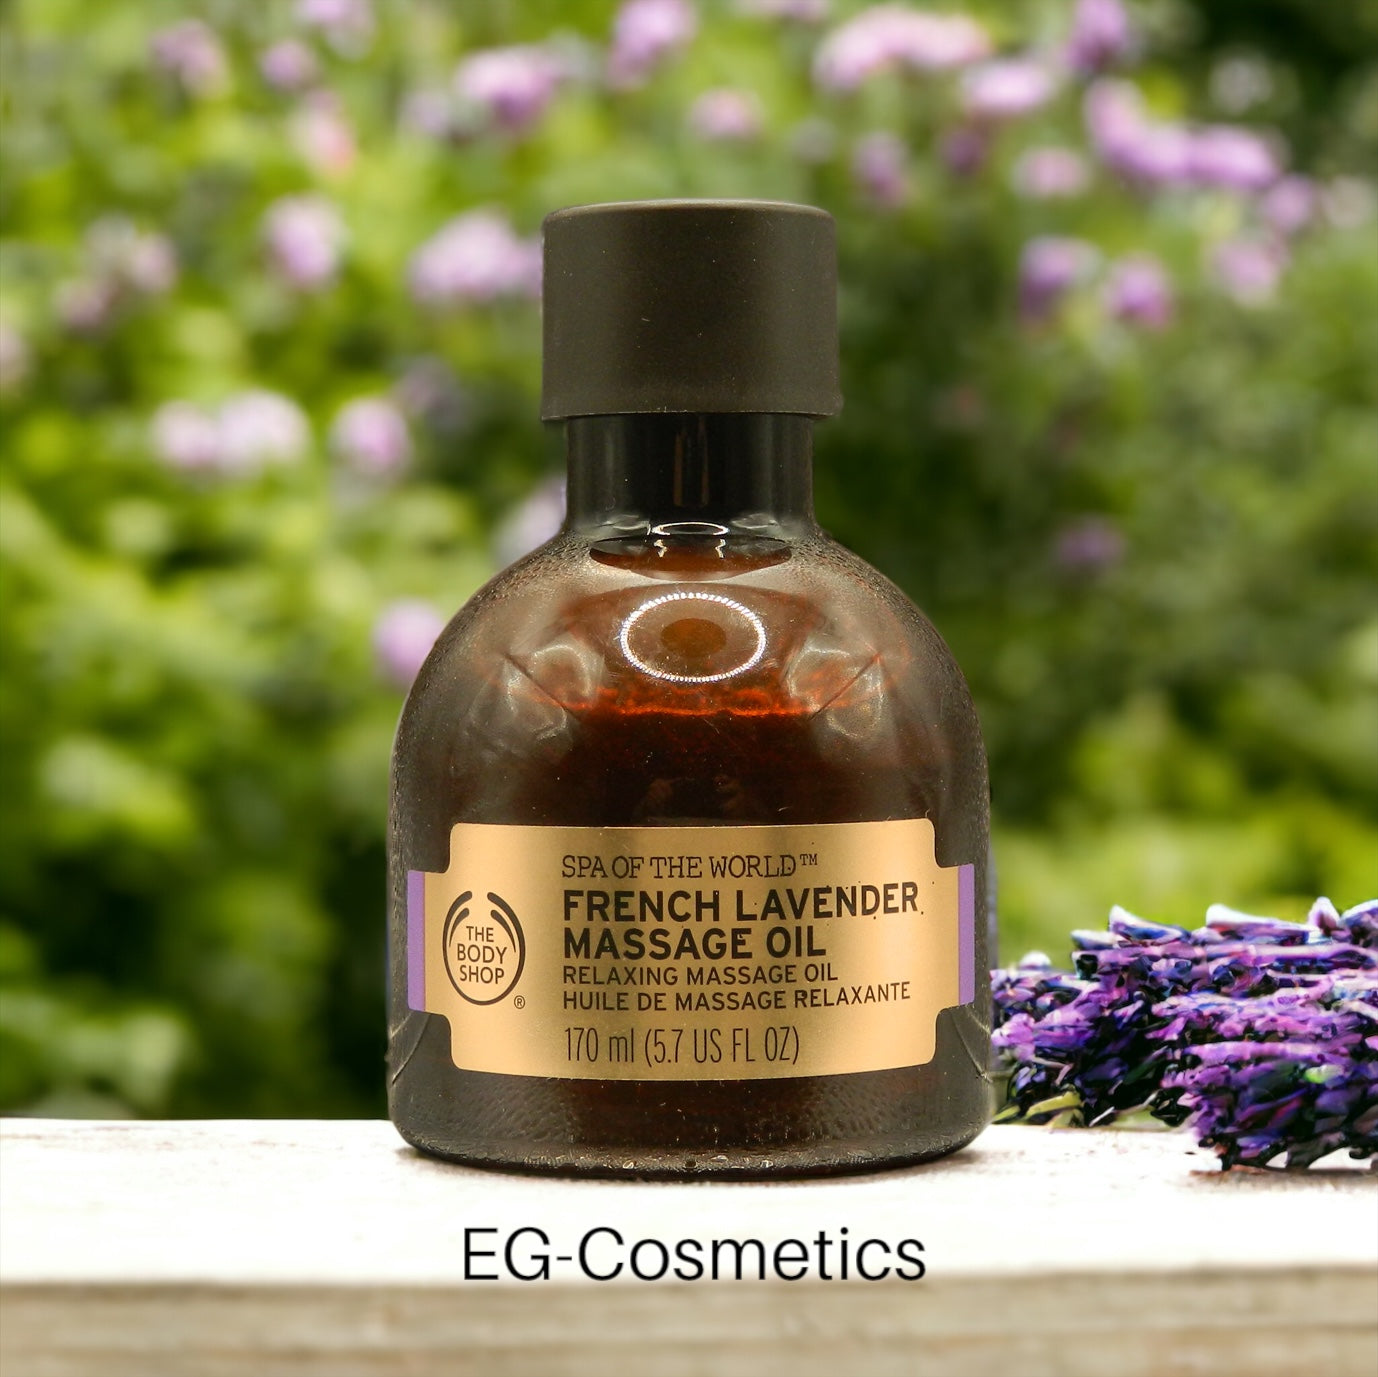 THE BODY SHOP Spa of The World™ French Lavender Massage Oil 170ml